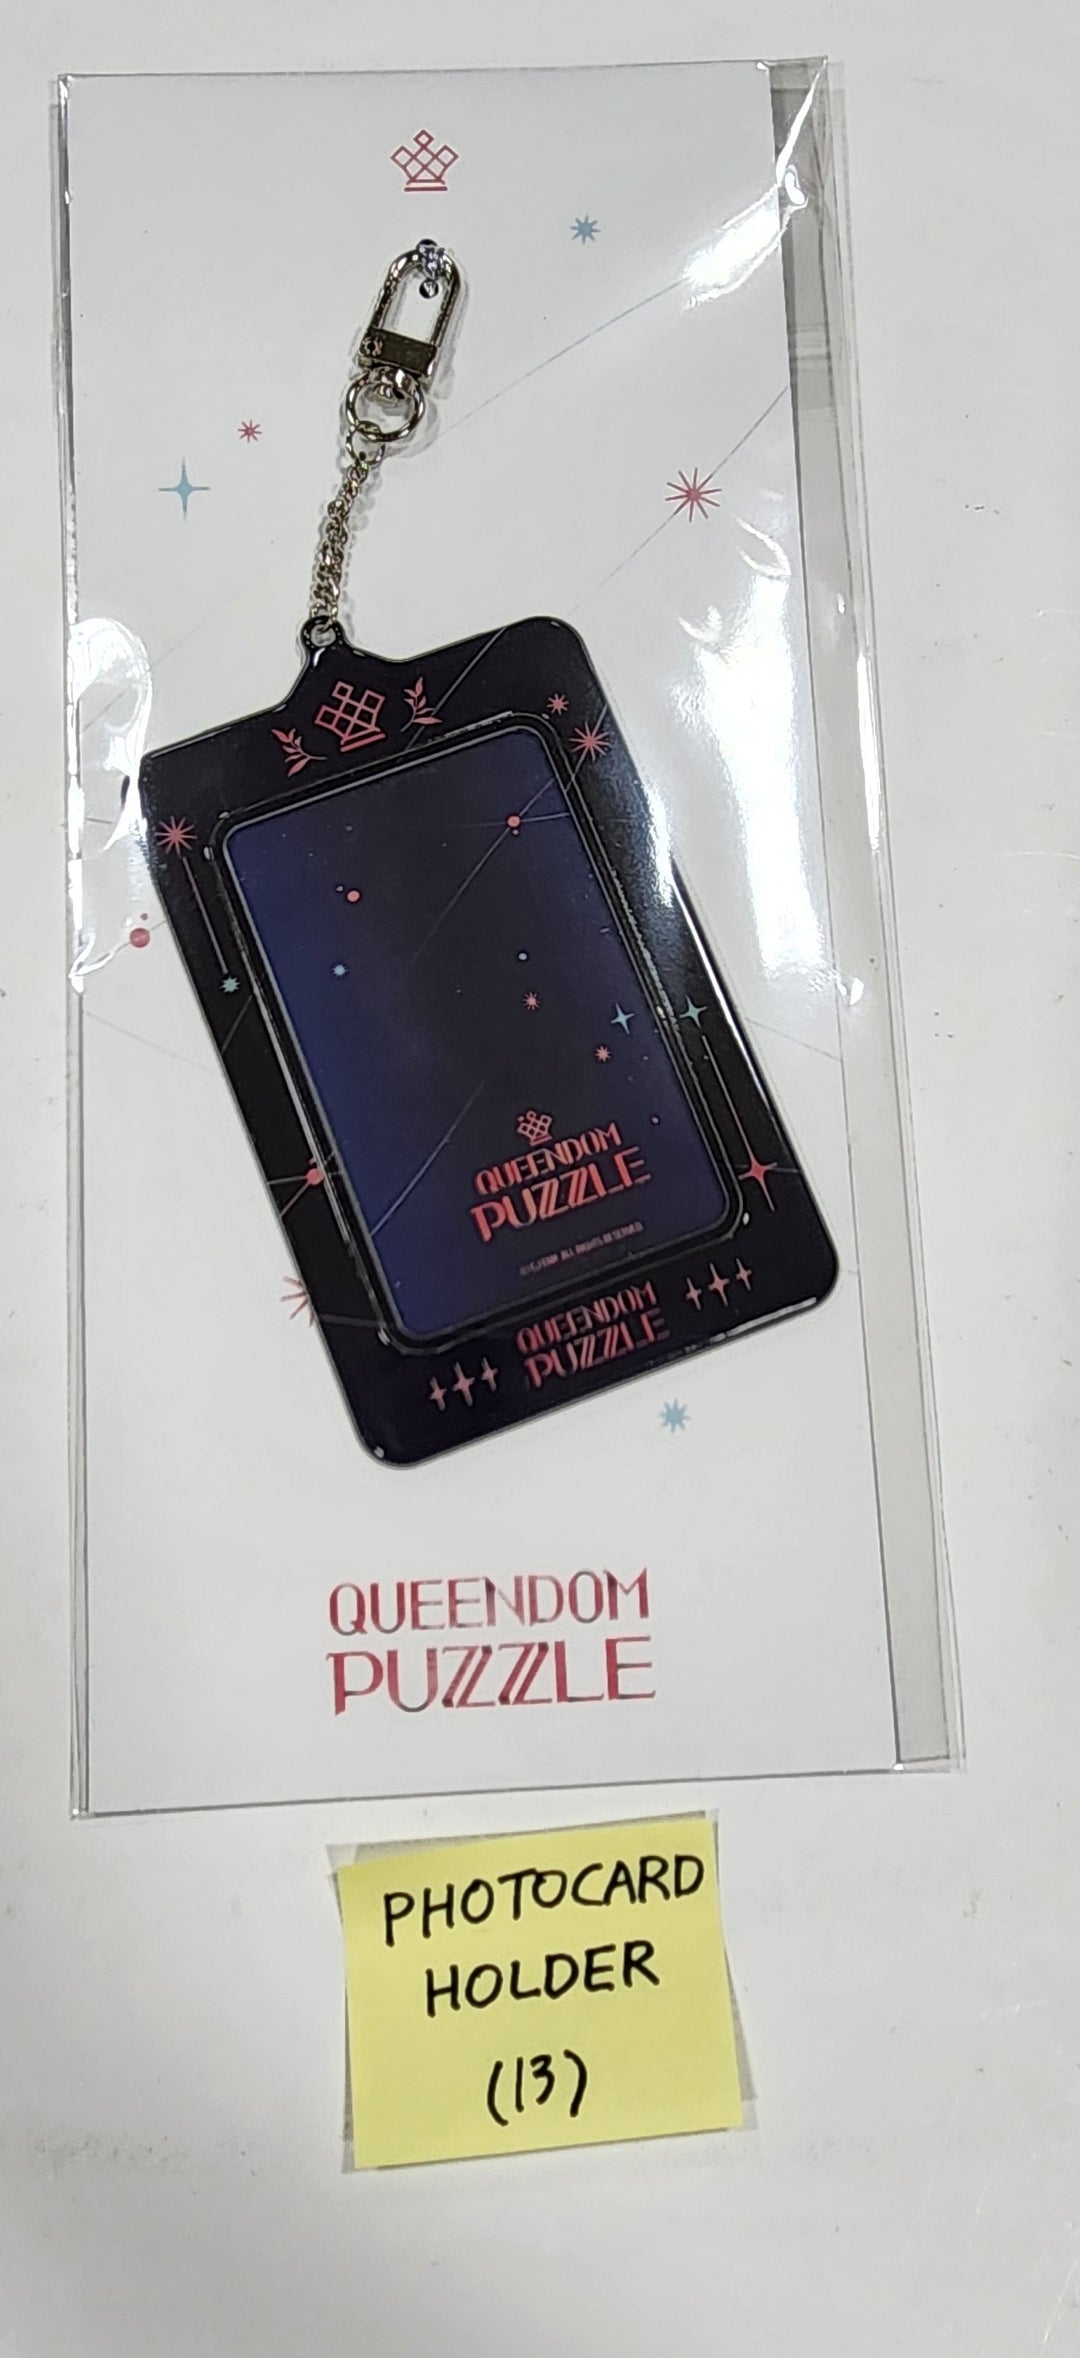 QUEENDOM PUZZLE - POP-UP Store Official MD [Photocard Holder] (Random Photocard]